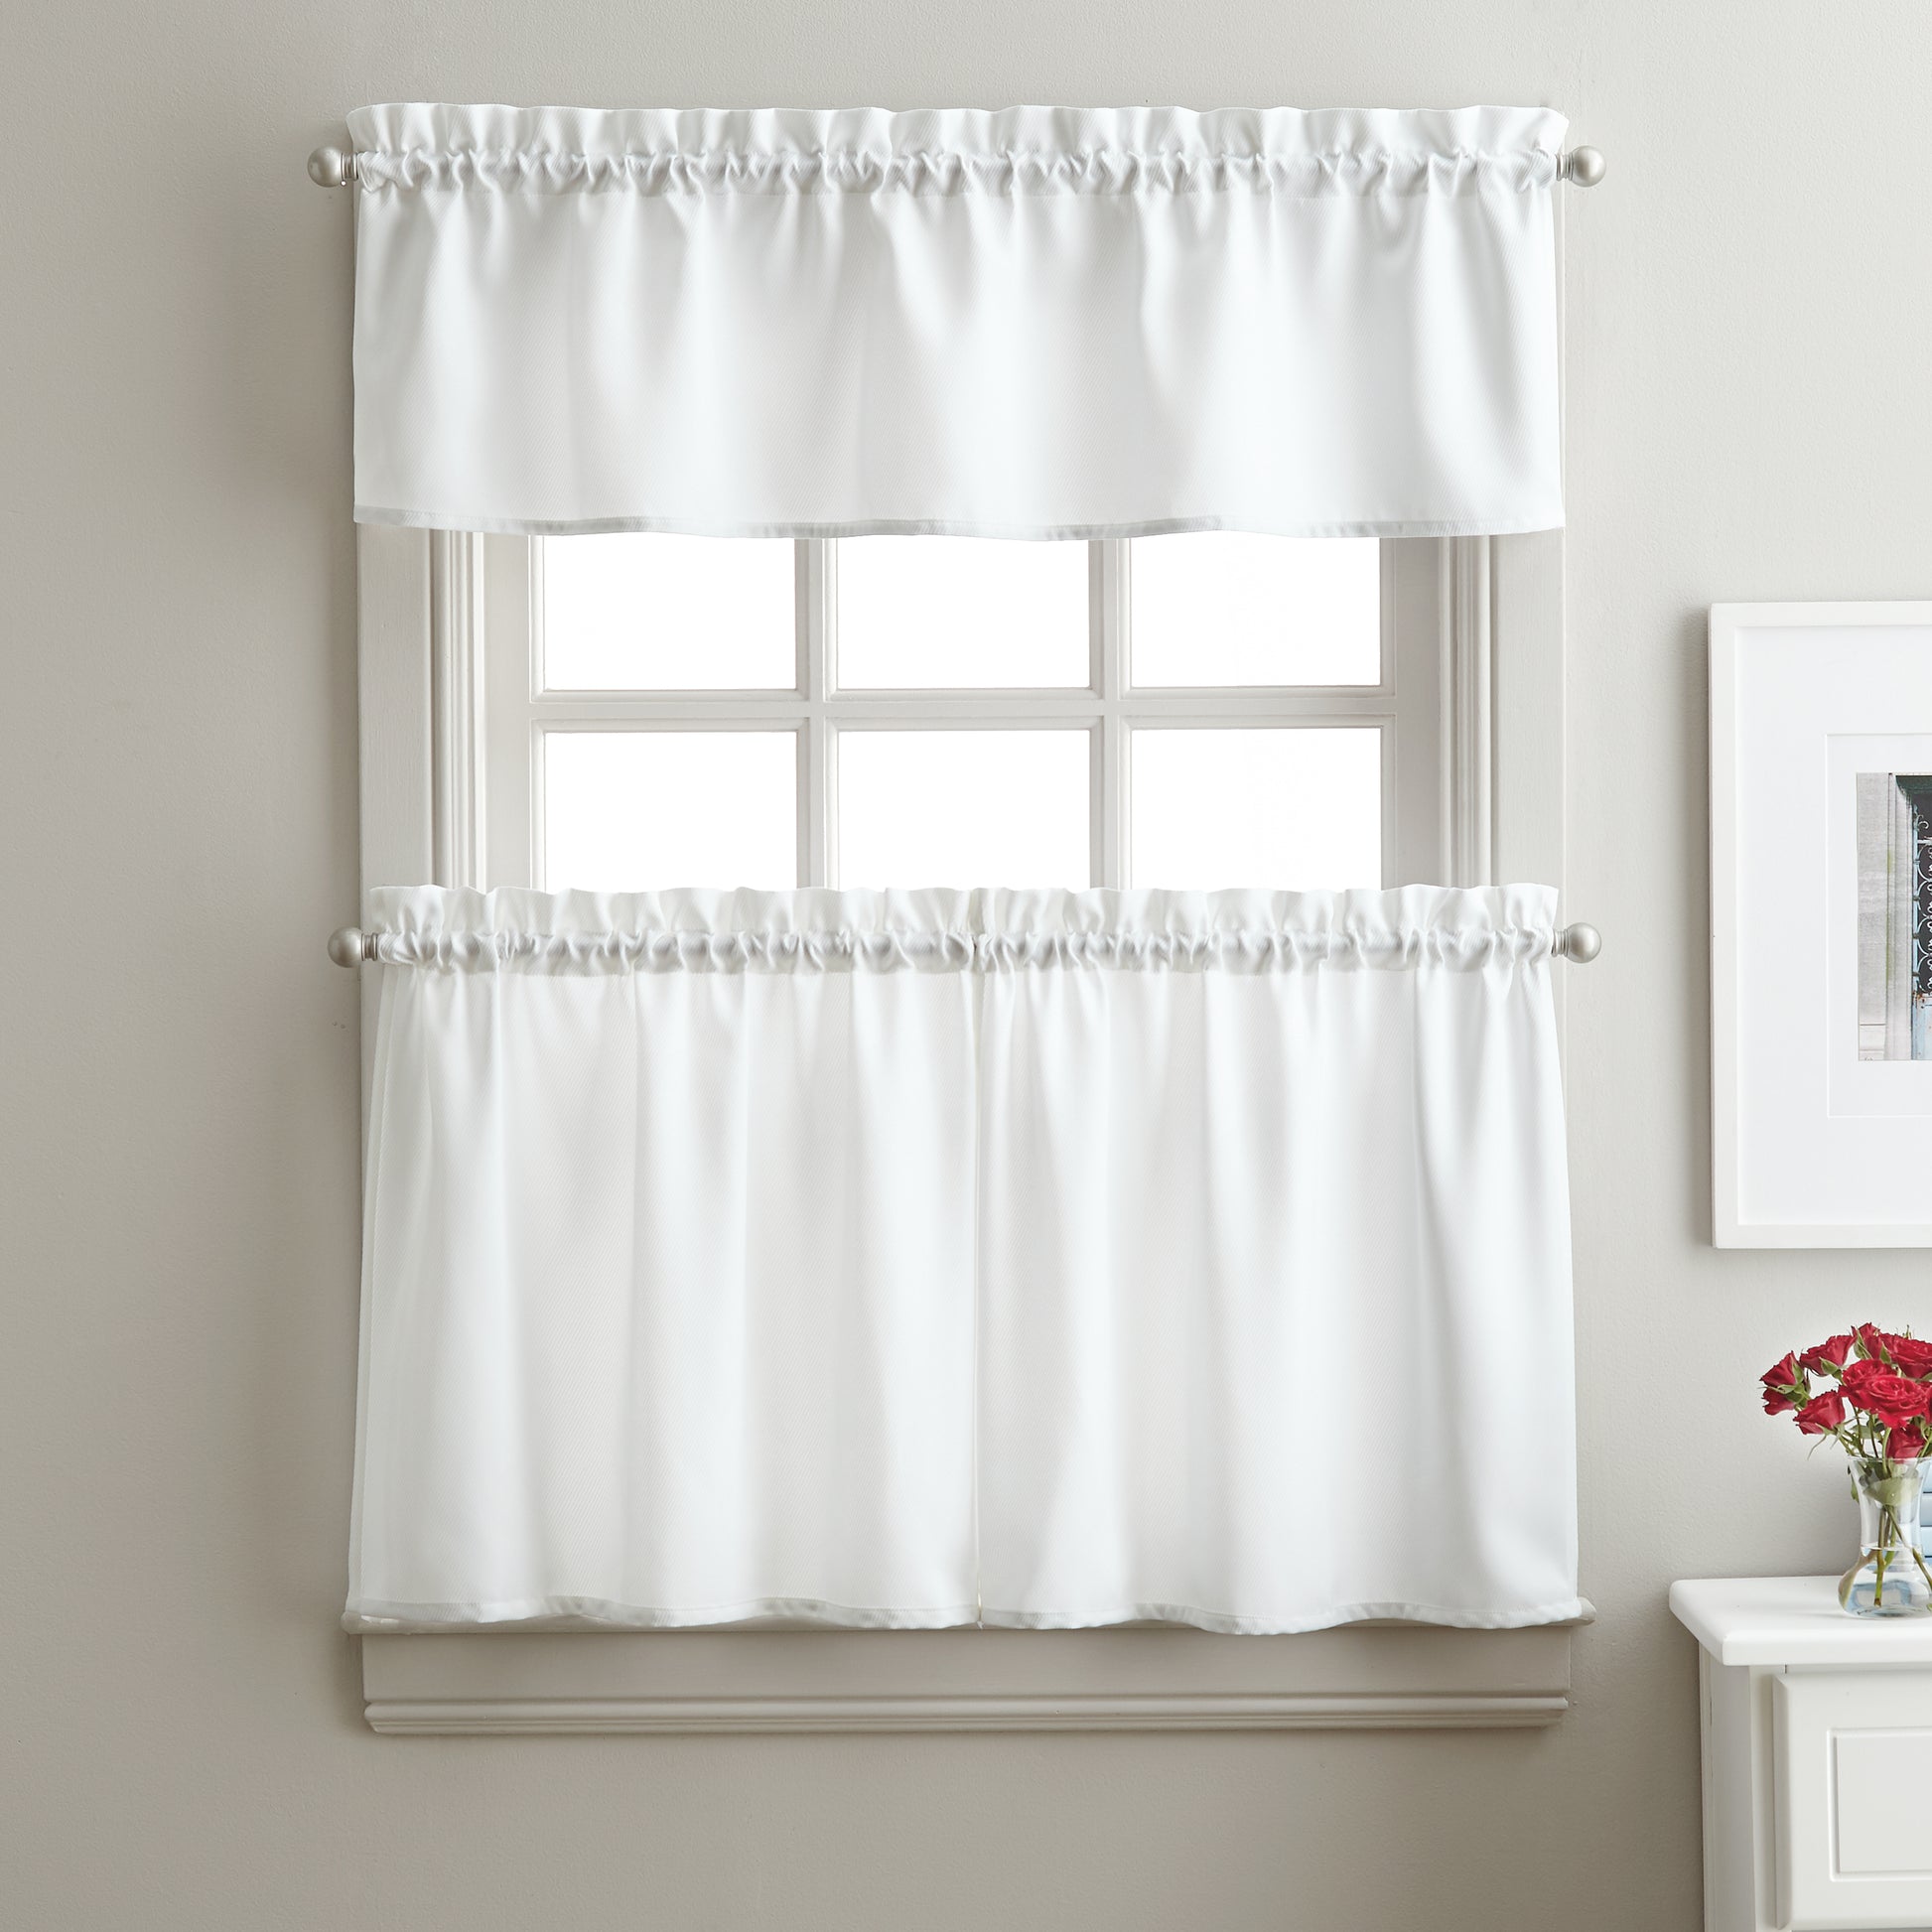 Curtainworks Solid Twill Tiers & Valance Set White